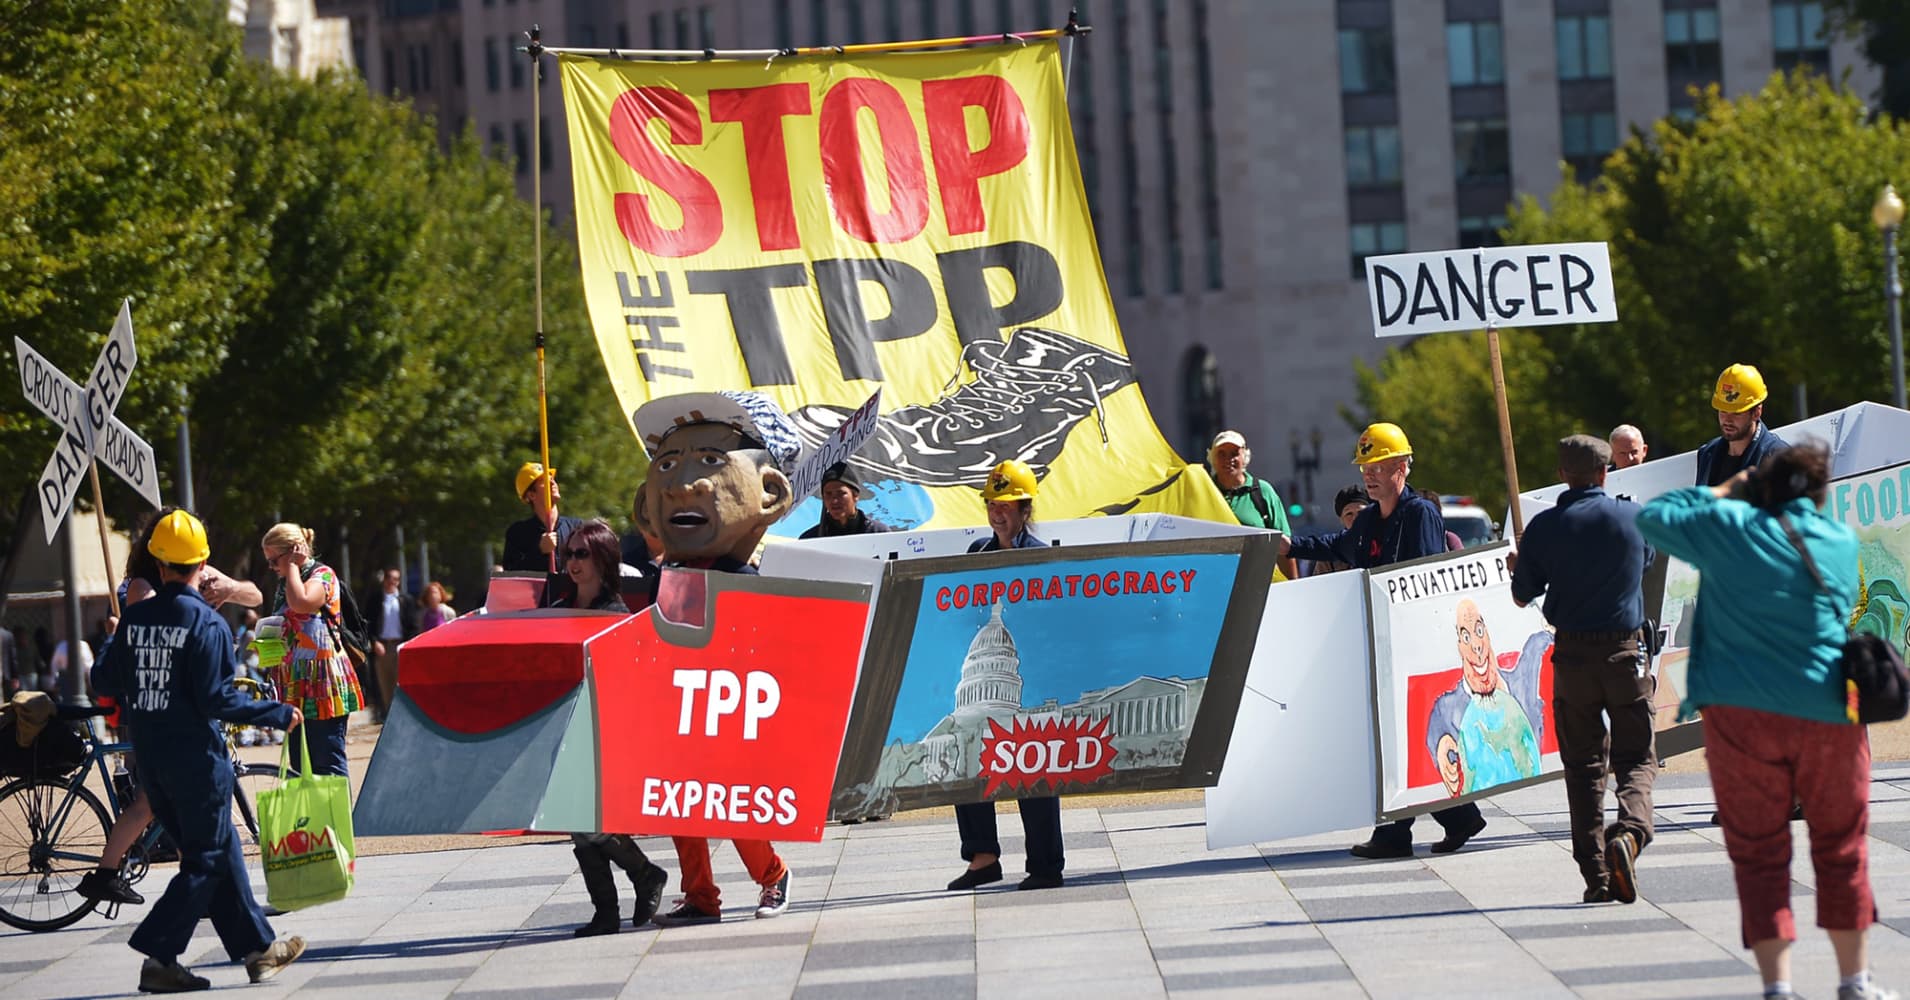 Demonstrators protesting against the Trans-Pacific Partnership are seen on Pennsylvania Avenue, in Washington, D.C.